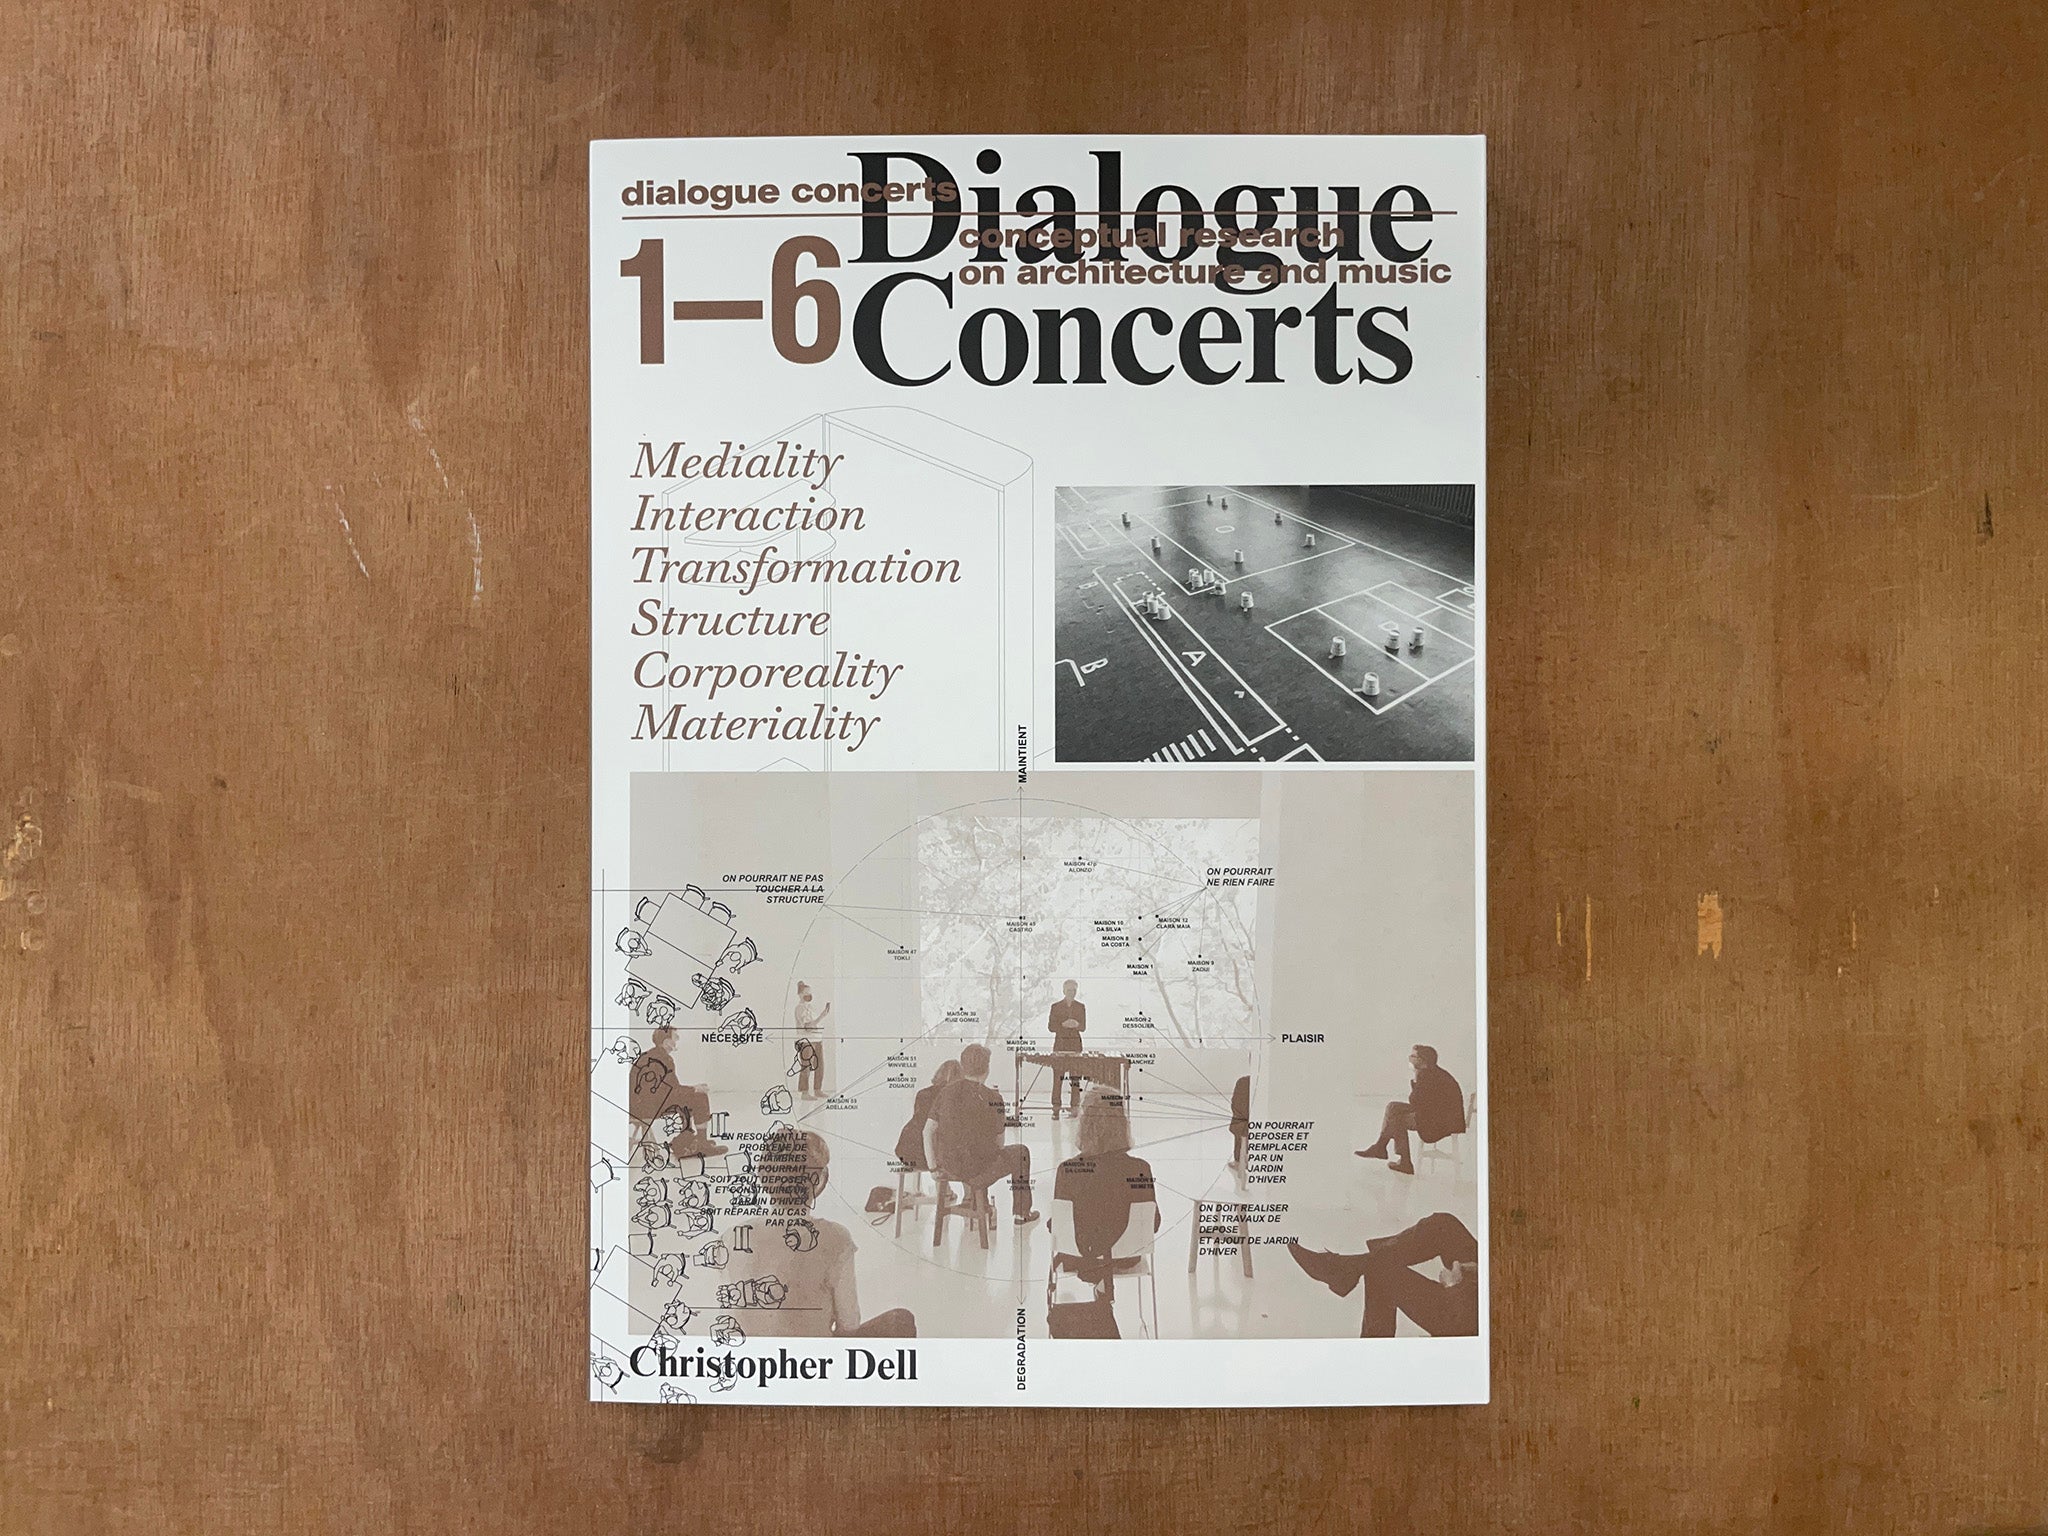 DIALOGUE CONCERTS: CONCEPTUAL RESEARCH ON ARCHITECTURE AND MUSIC by Christopher Dell